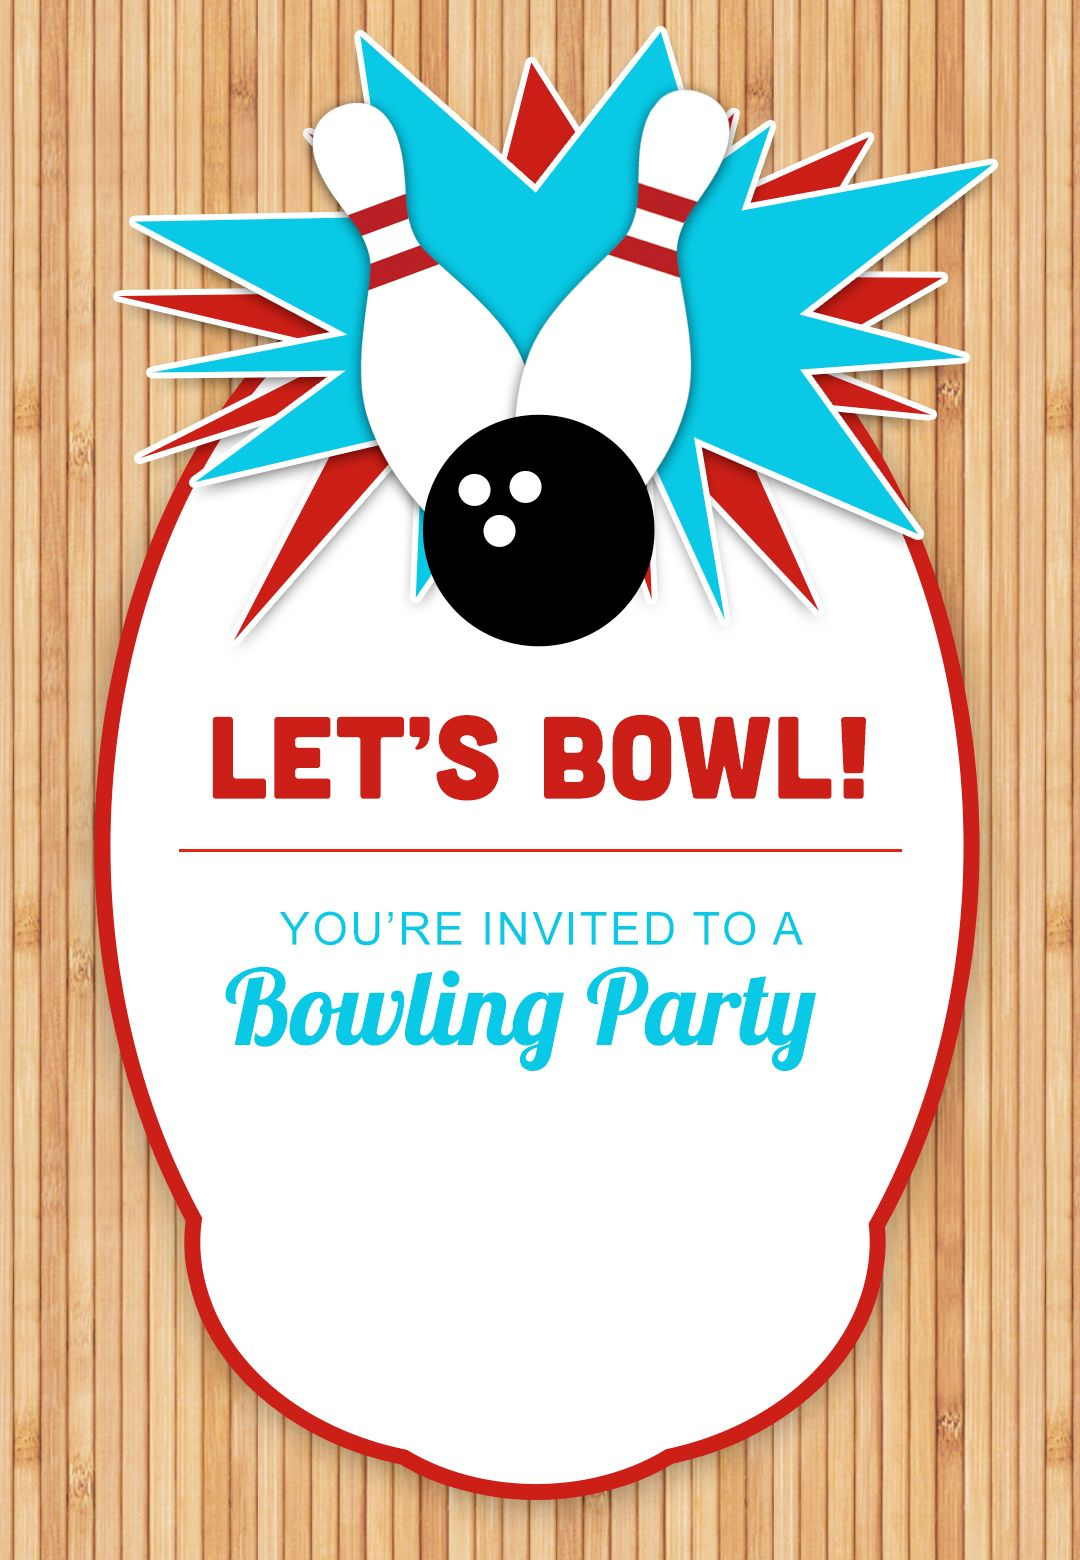 Bowling Party - Free Printable Birthday Invitation Template - Free Printable Birthday Invitations With Pictures